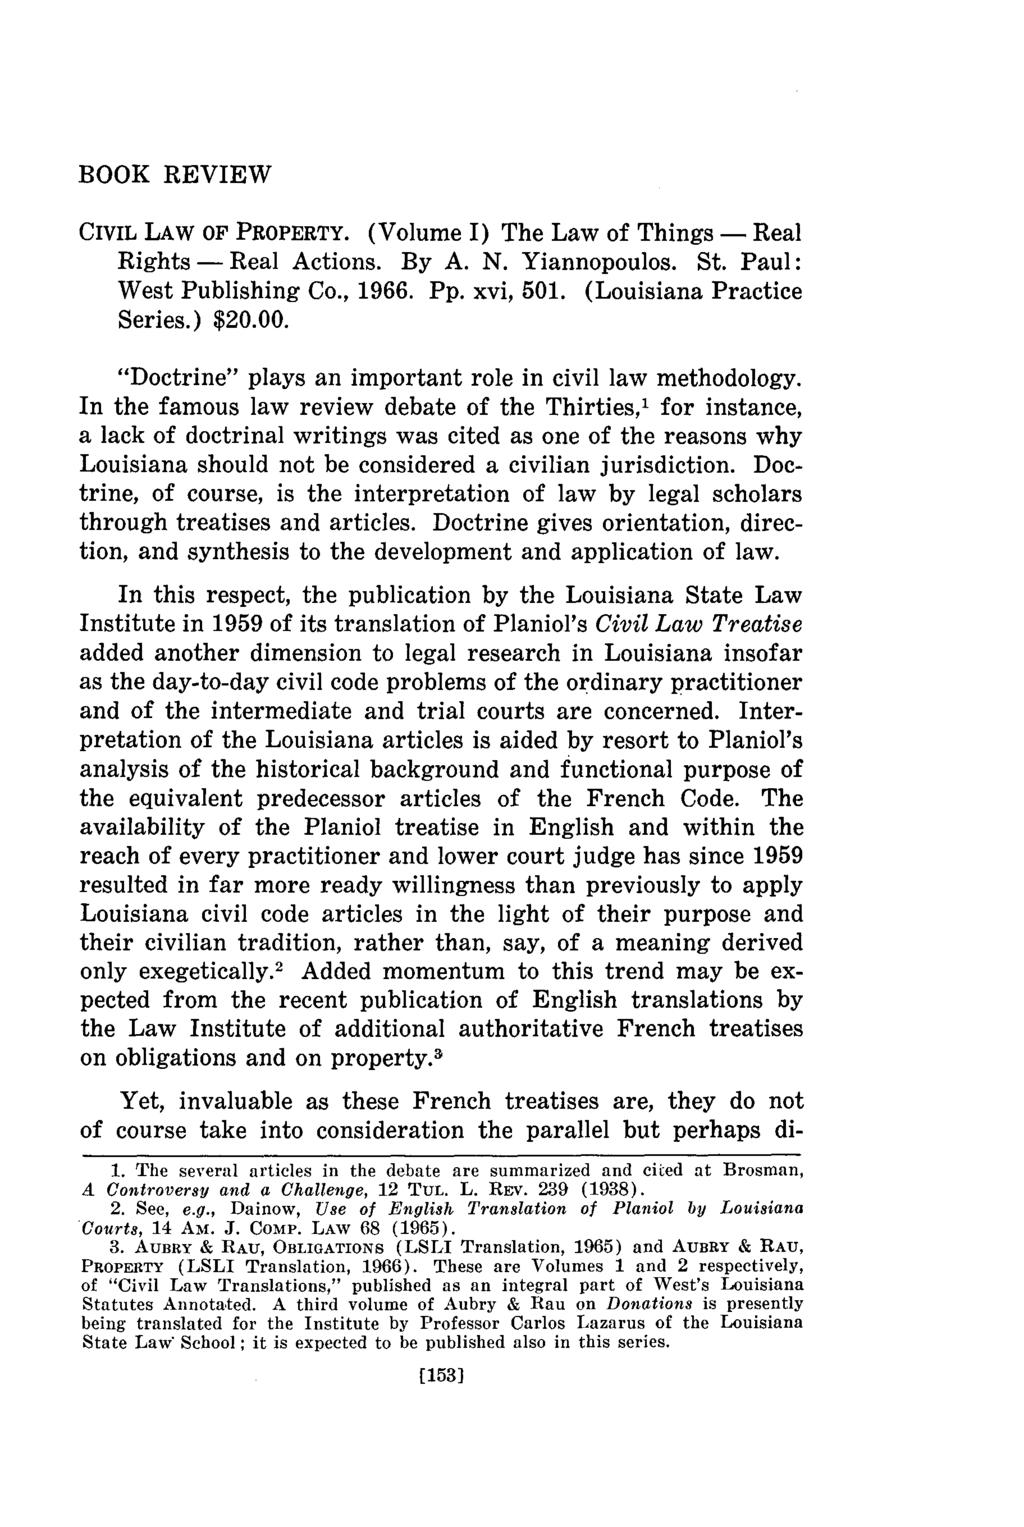 BOOK REVIEW CIVIL LAW OF PROPERTY. (Volume I) The Law of Things - Real Rights - Real Actions. By A. N. Yiannopoulos. St. Paul: West Publishing Co., 1966. Pp. xvi, 501. (Louisiana Practice Series.